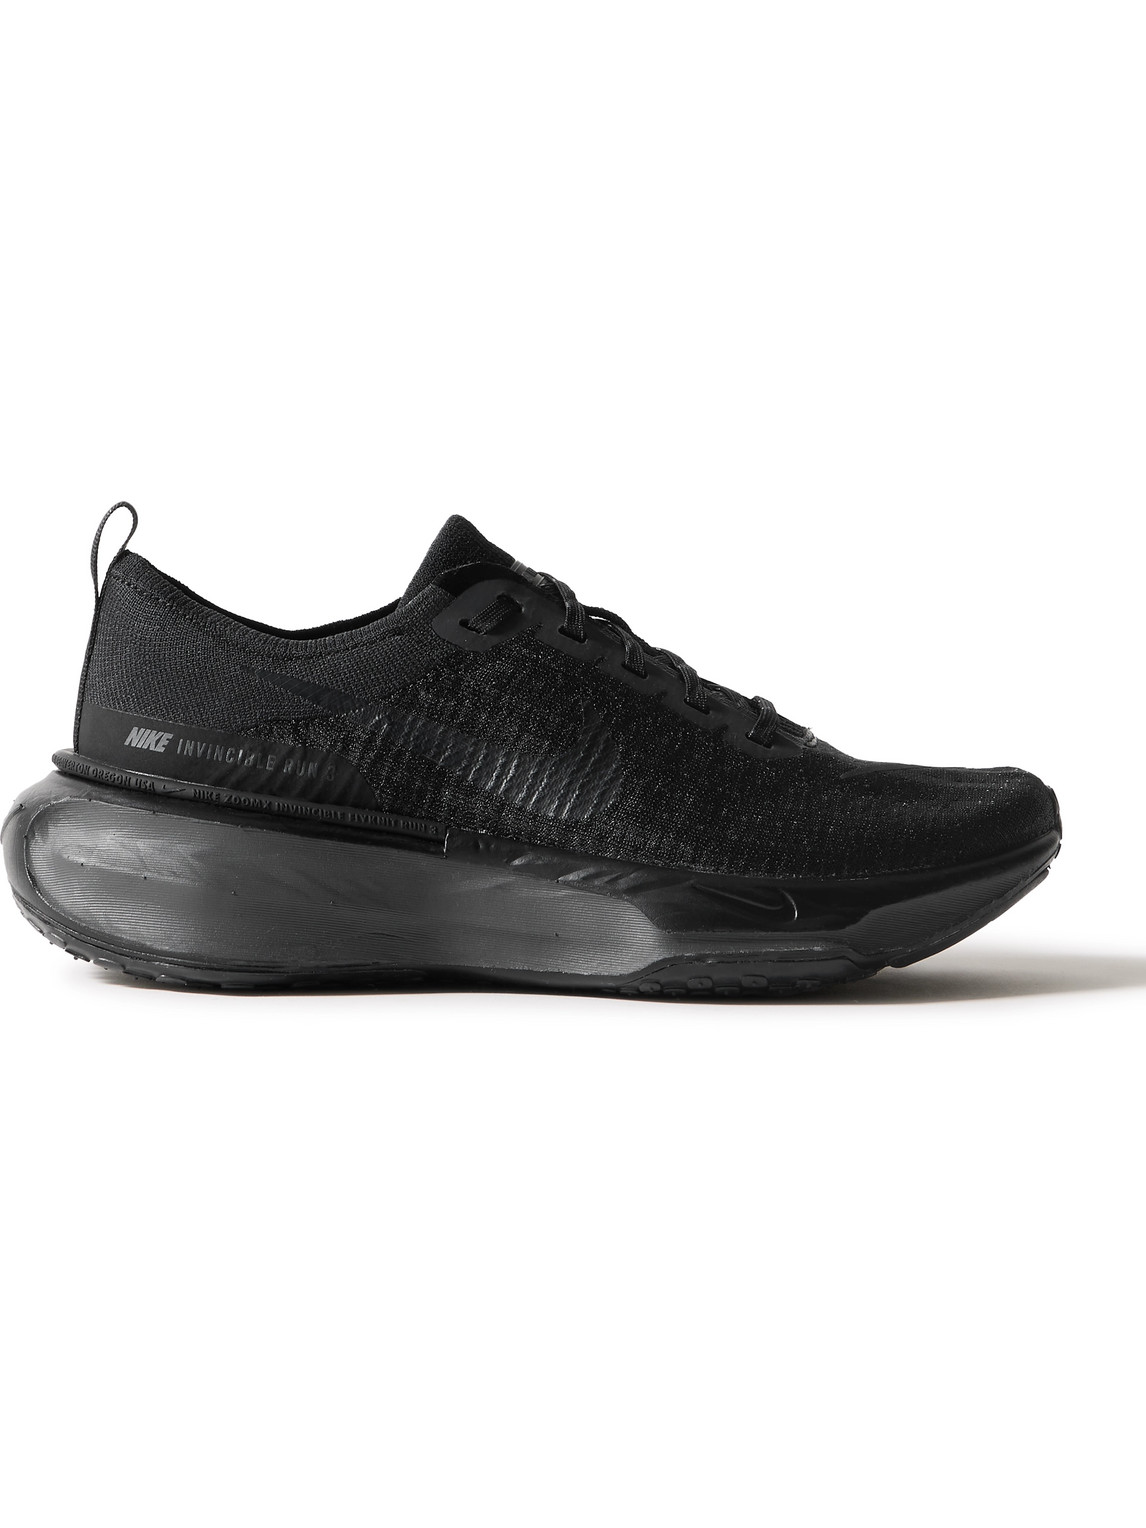 NIKE ZOOMX INVINCIBLE 3 FLYKNIT RUNNING SNEAKERS